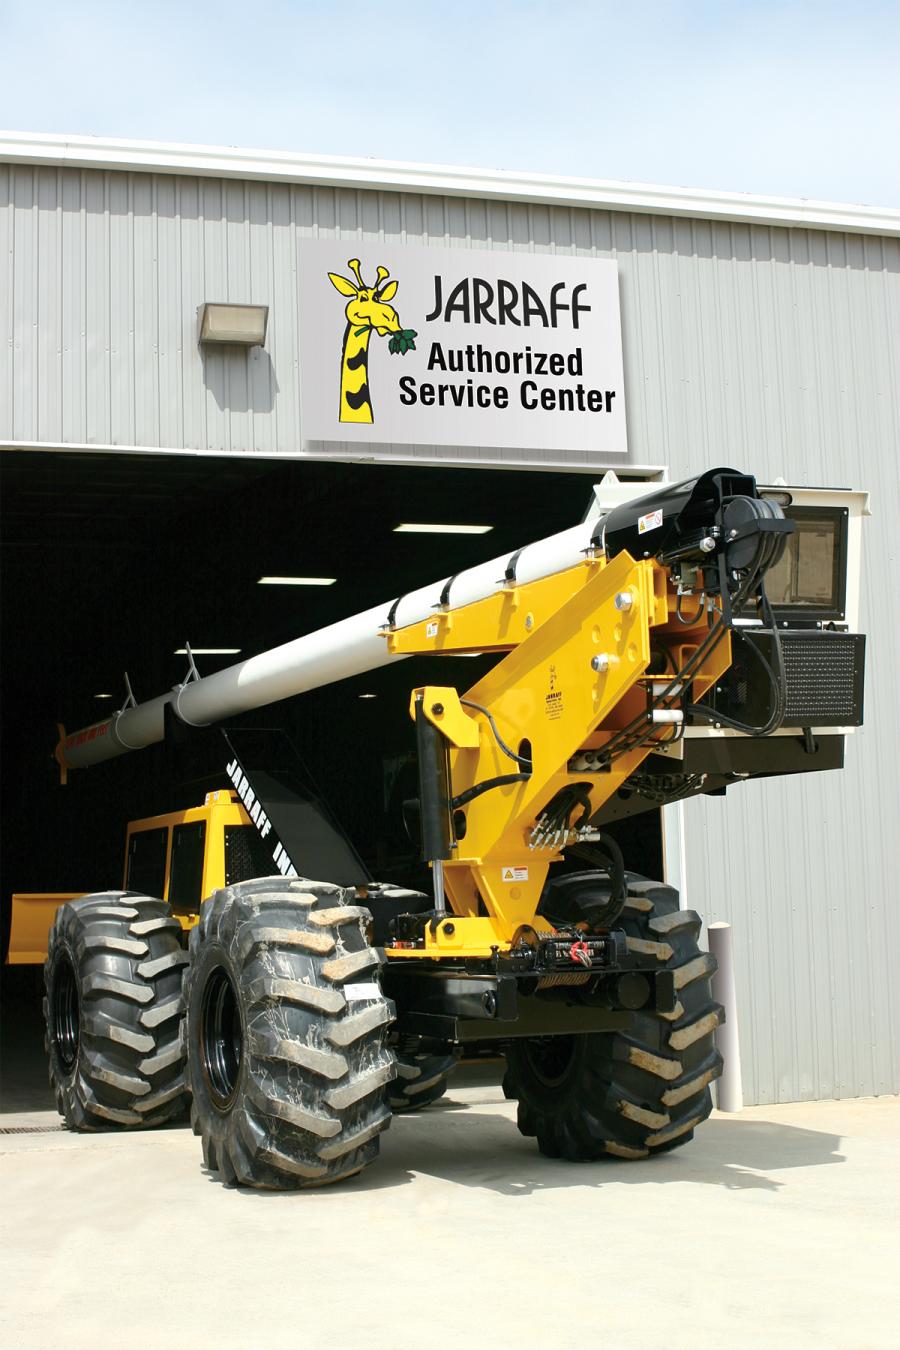 Jarraff Industries has added over-the-road mechanic services to its authorized service center.